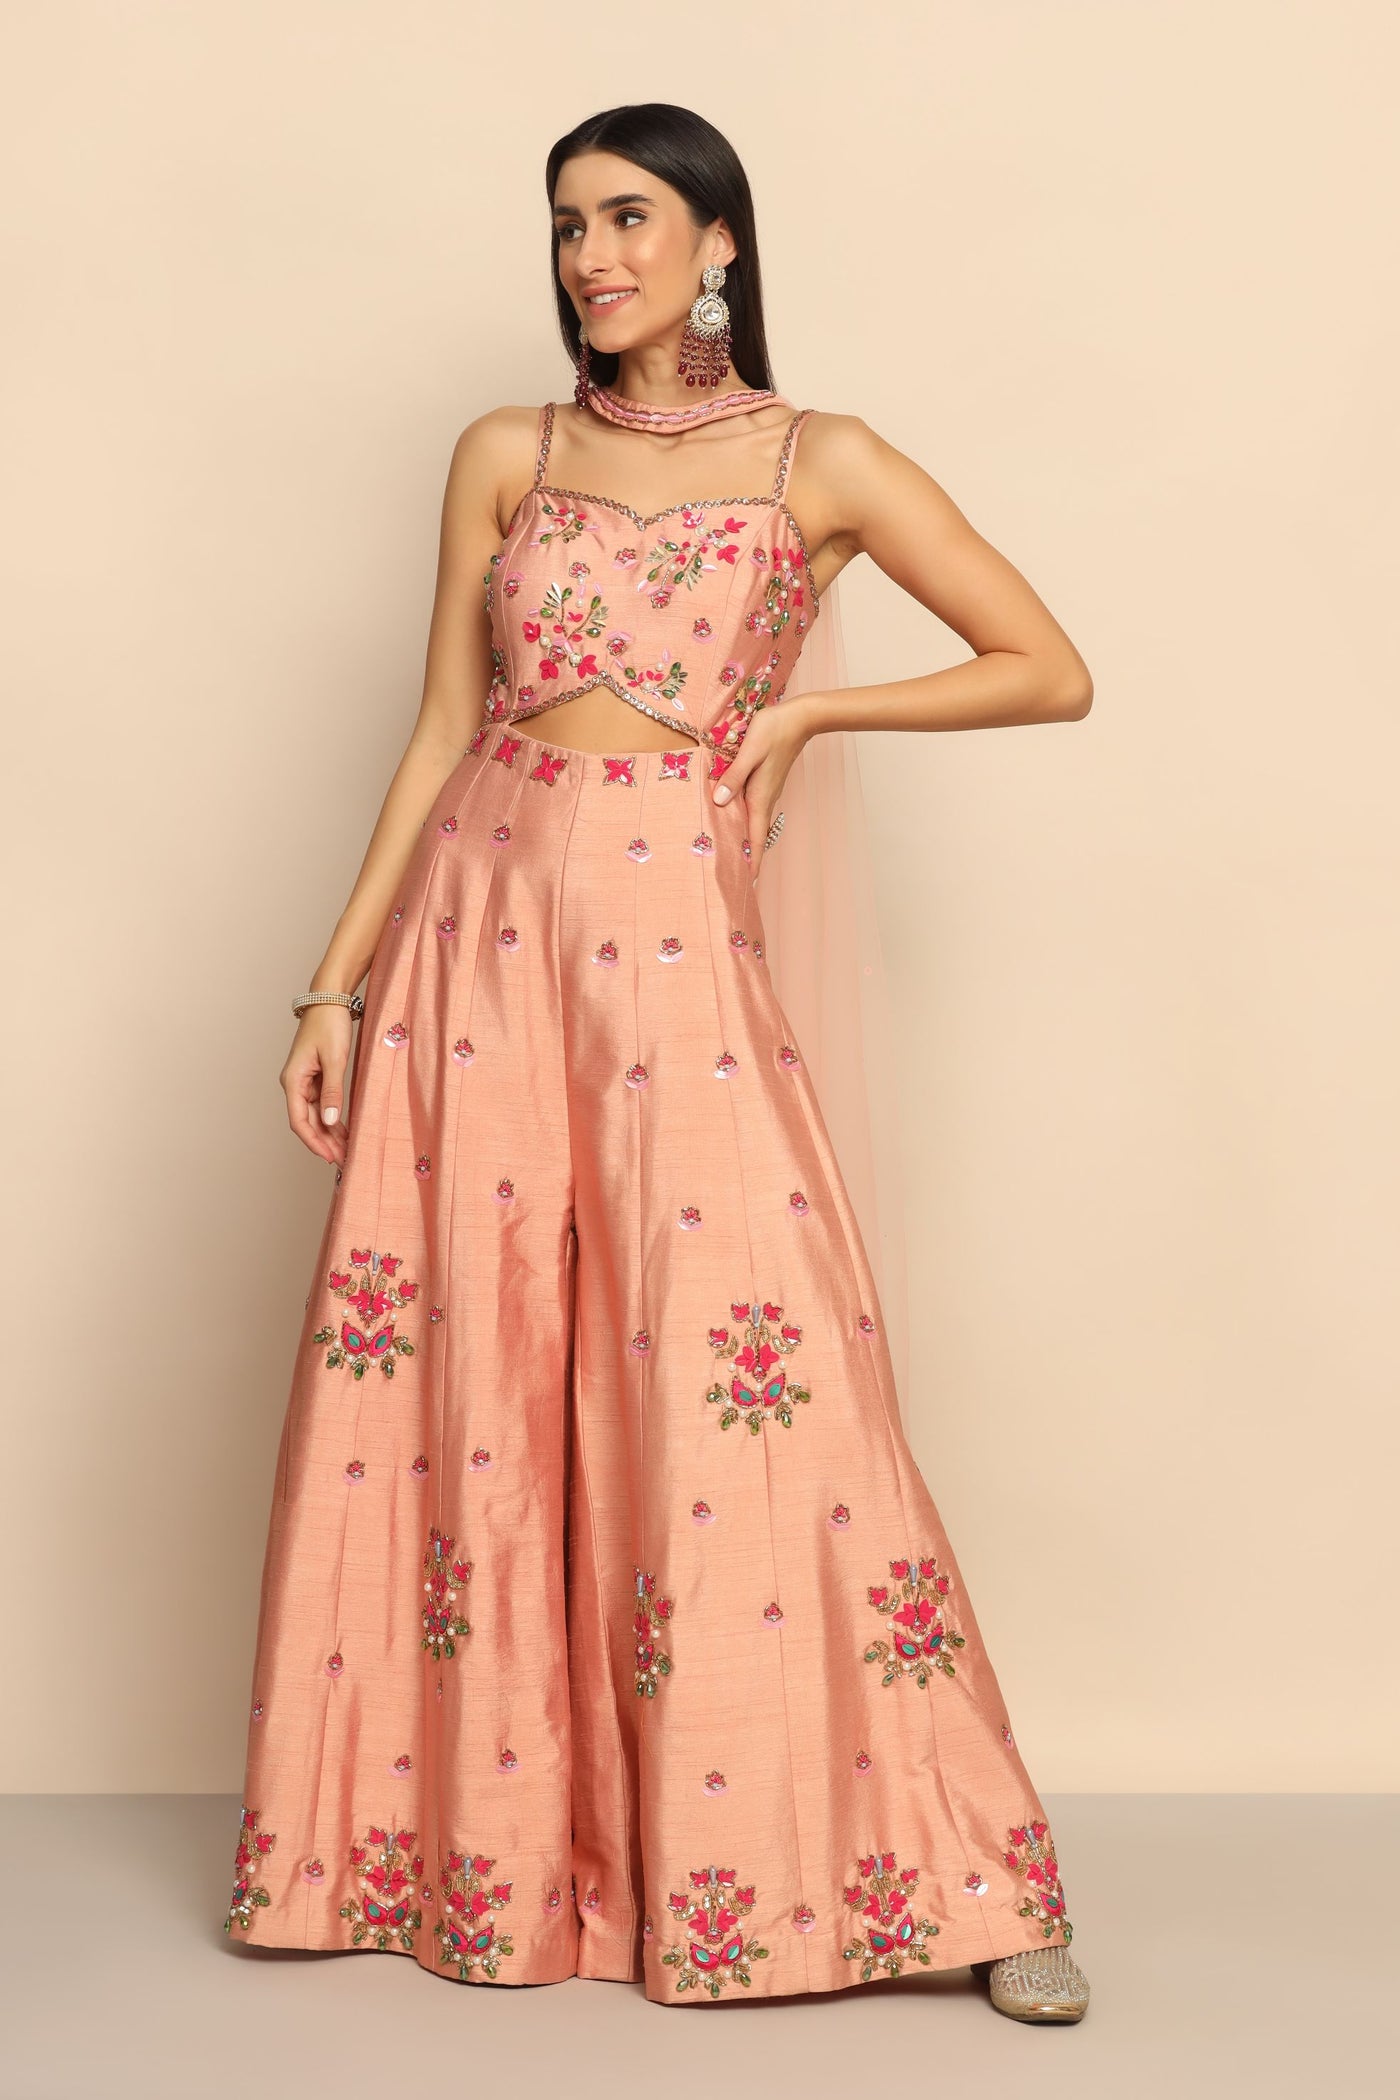 Elegant Peach Dress with Sequins, Beads, and Cut Dana